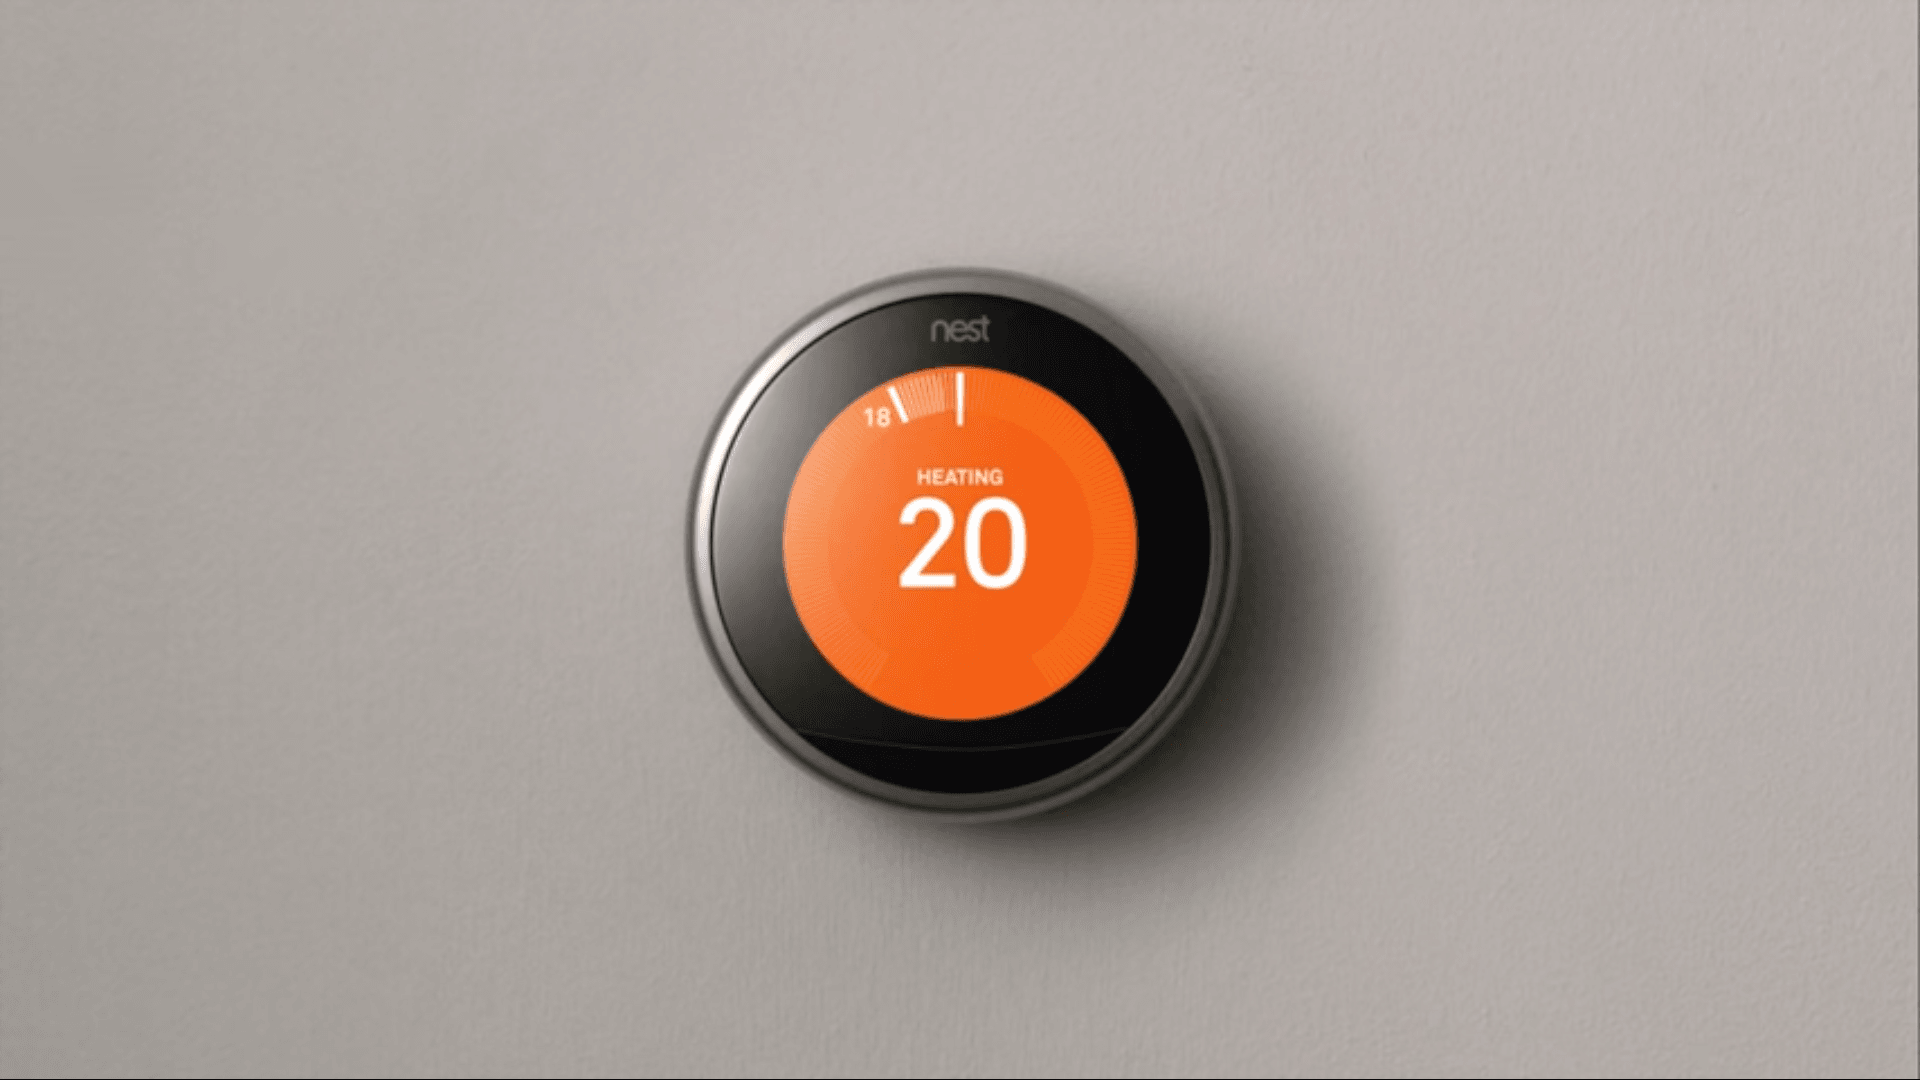 Nest Learning Thermostat vs Ecobee SmartThermostat: Which is better?